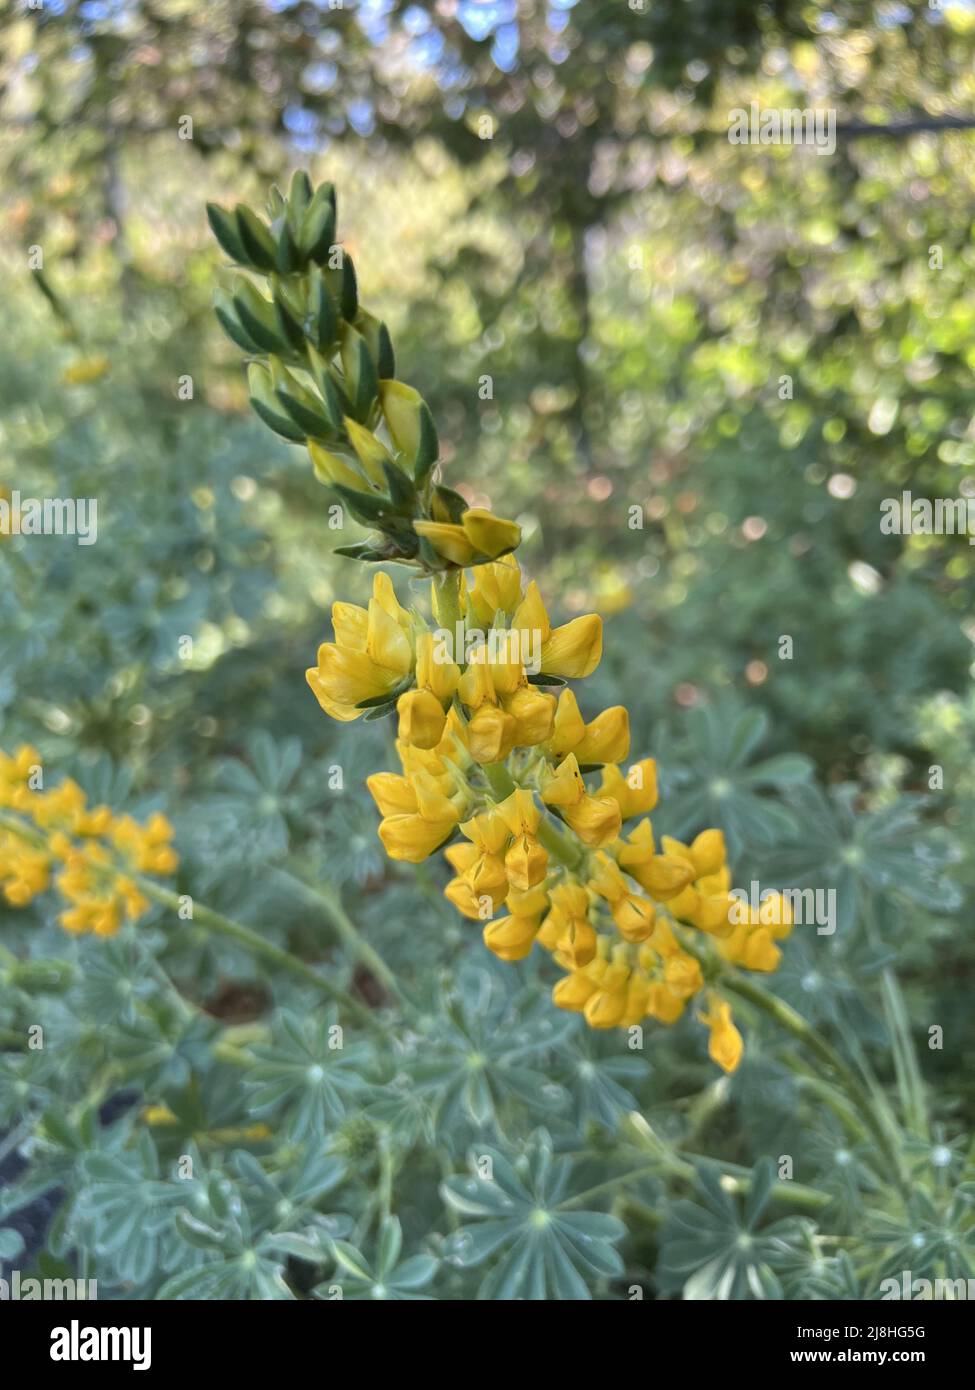 Close-up of yellow flowers of a Chick Lupine (Lupinus microcarpus var densiflorus) plant in Lafayette, California, April 15, 2022. Photo courtesy Sftm. Stock Photo